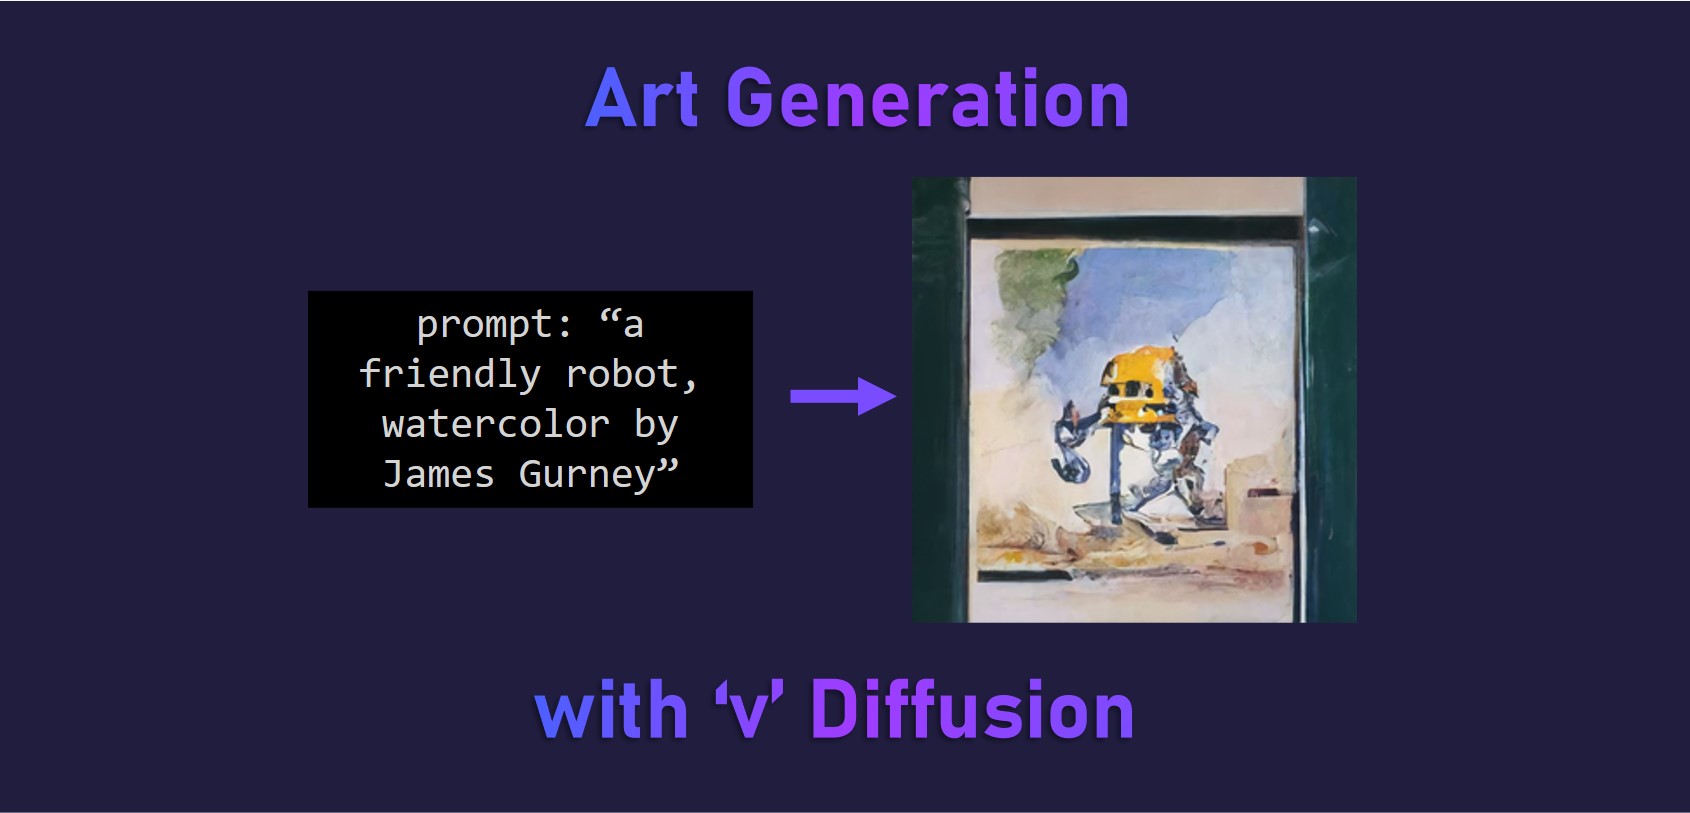 Art Generation with v-diffusion